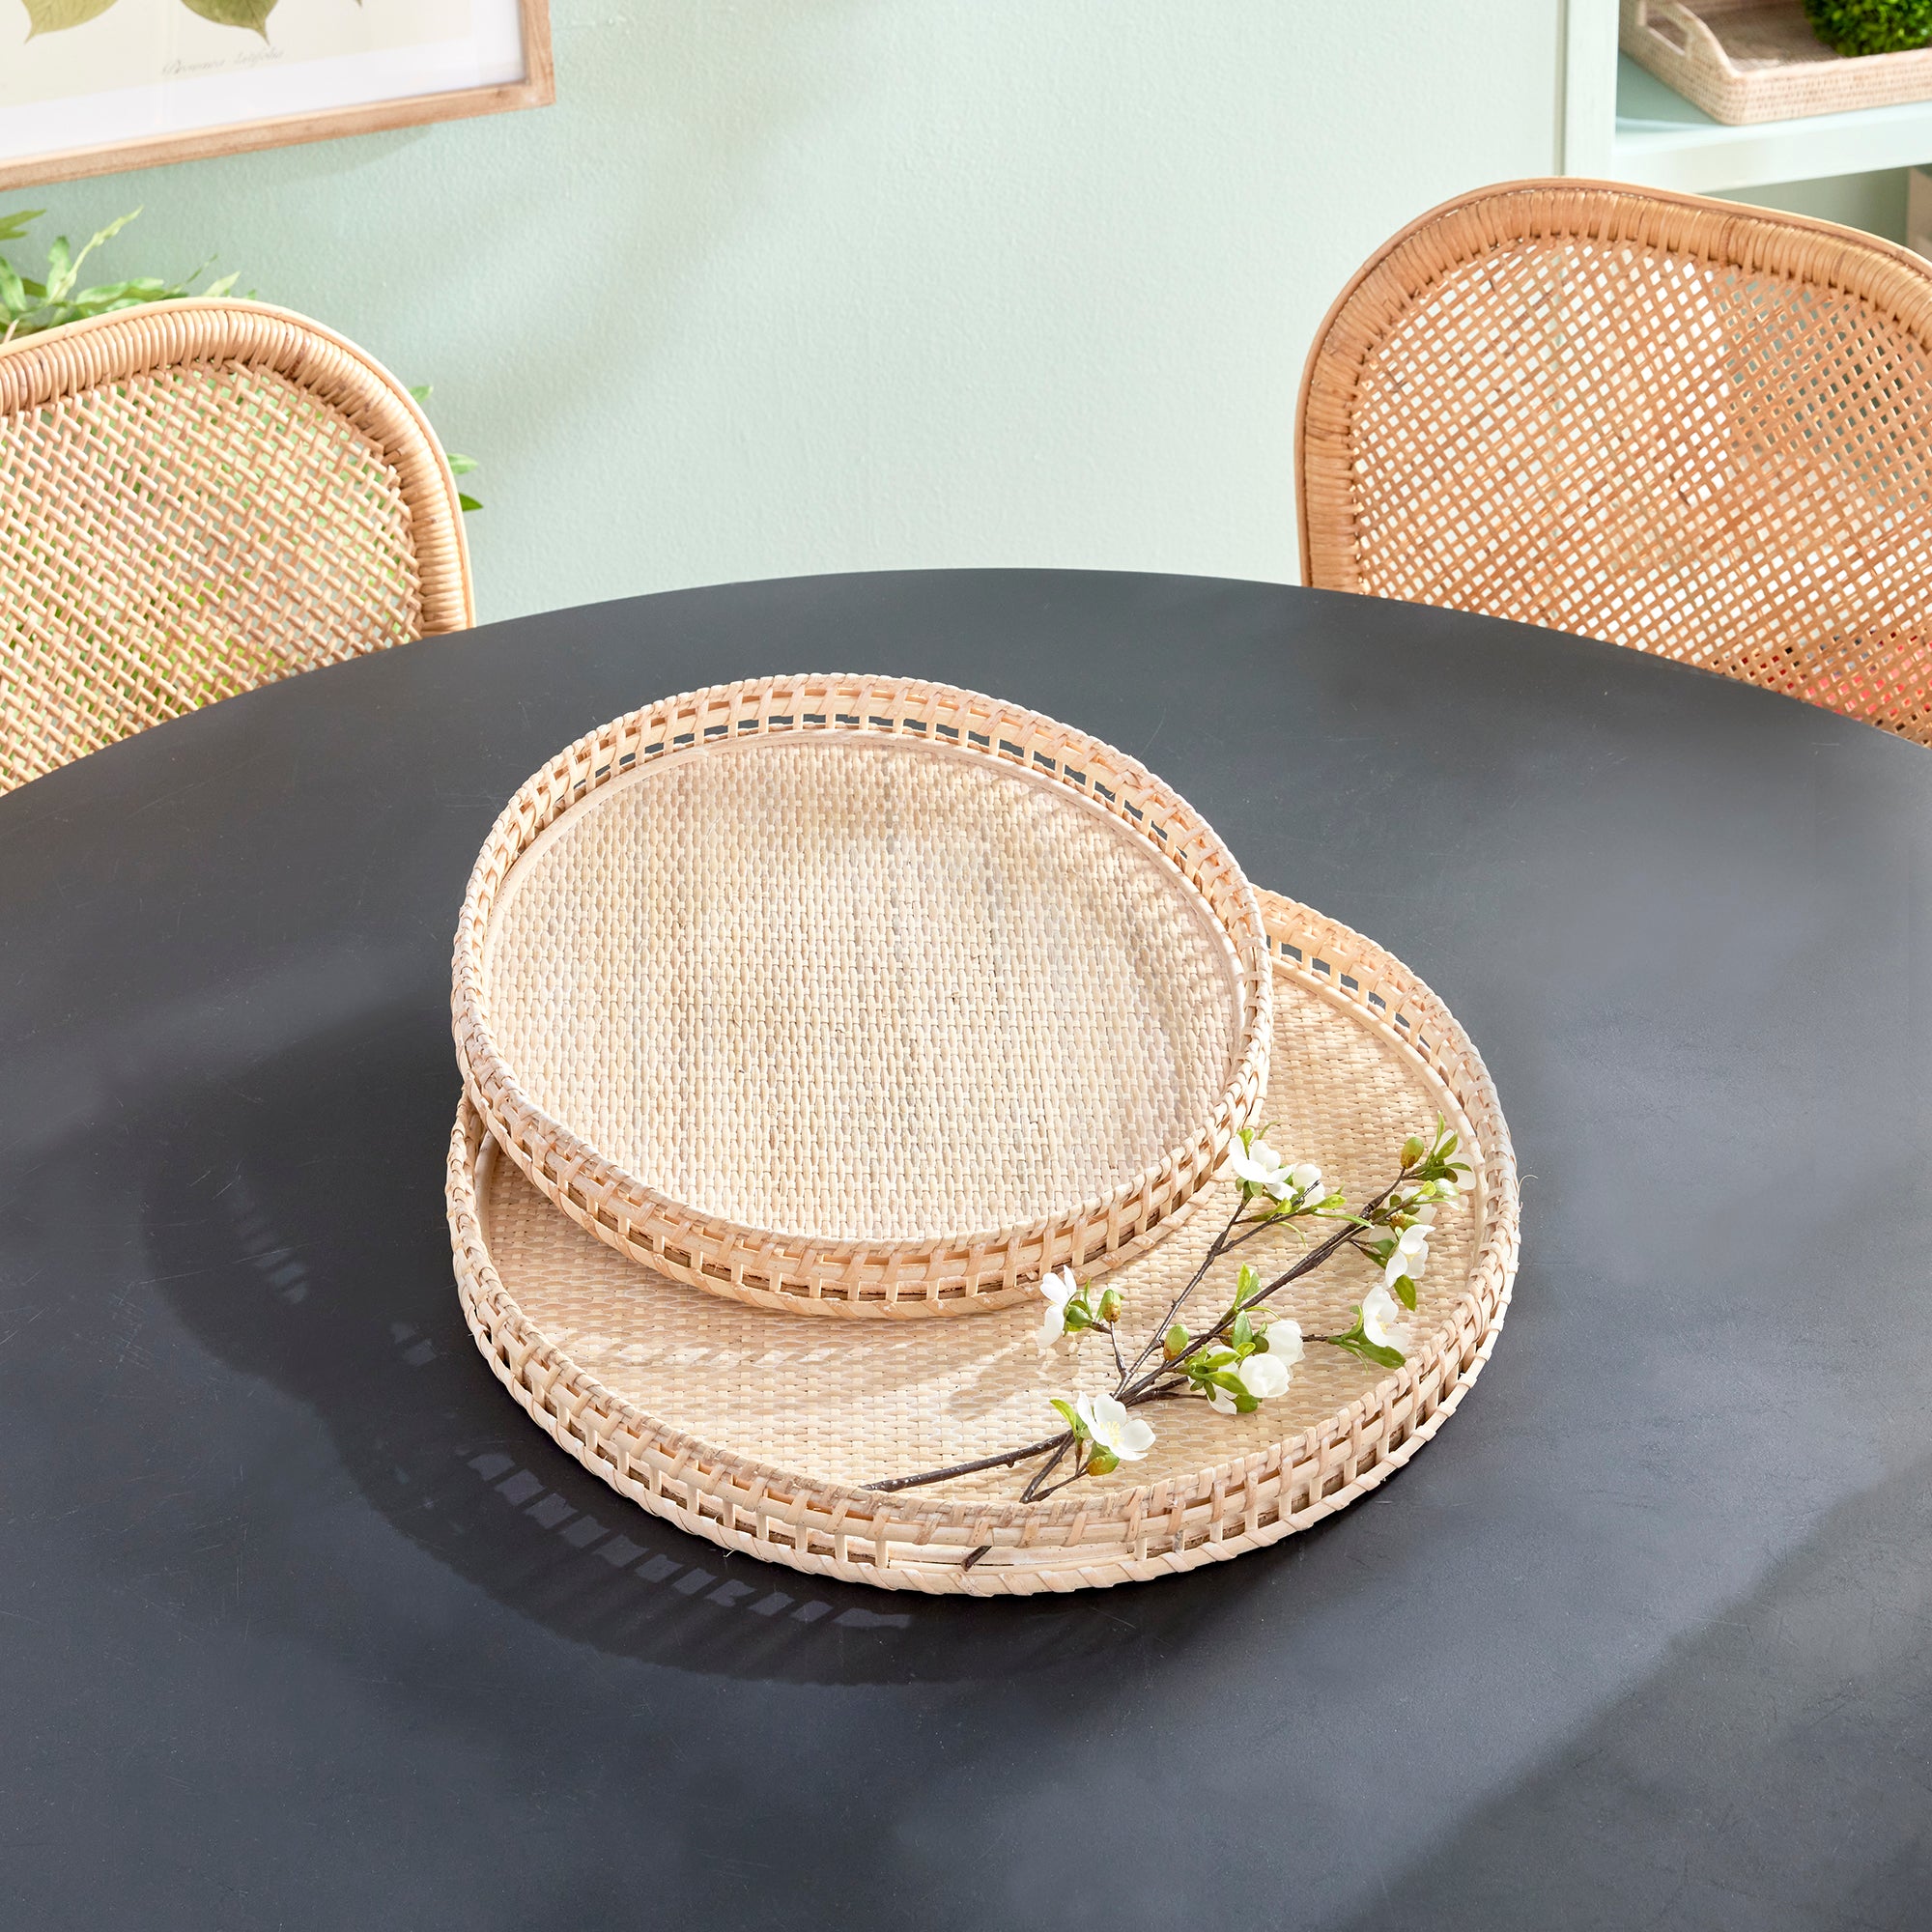 In a woven rattan with a fresh whitewash finish, these substantial, coastal-inspired trays are a welcomed accent in any setting. Perfect for coffee table or ottoman to create a base for a stunning vignette. Amethyst Home provides interior design, new construction, custom furniture, and area rugs in the San Diego metro area.